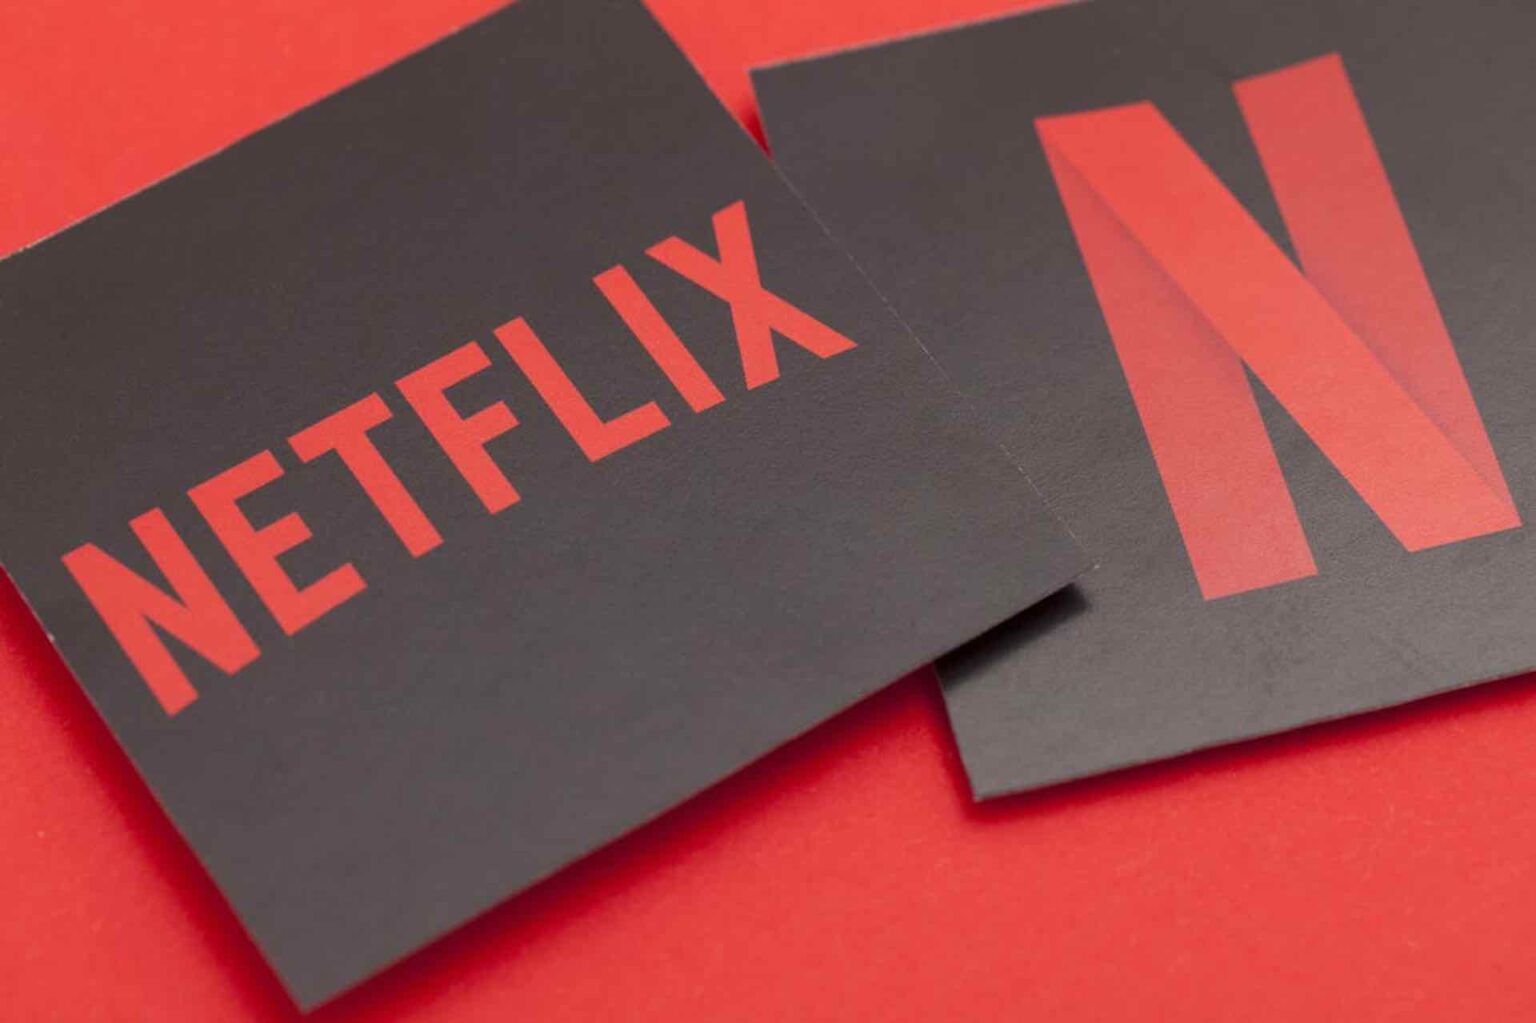 Netflix original movies seem to be ones that might not have fared well at the box office, and studios didn’t want to take the risk.